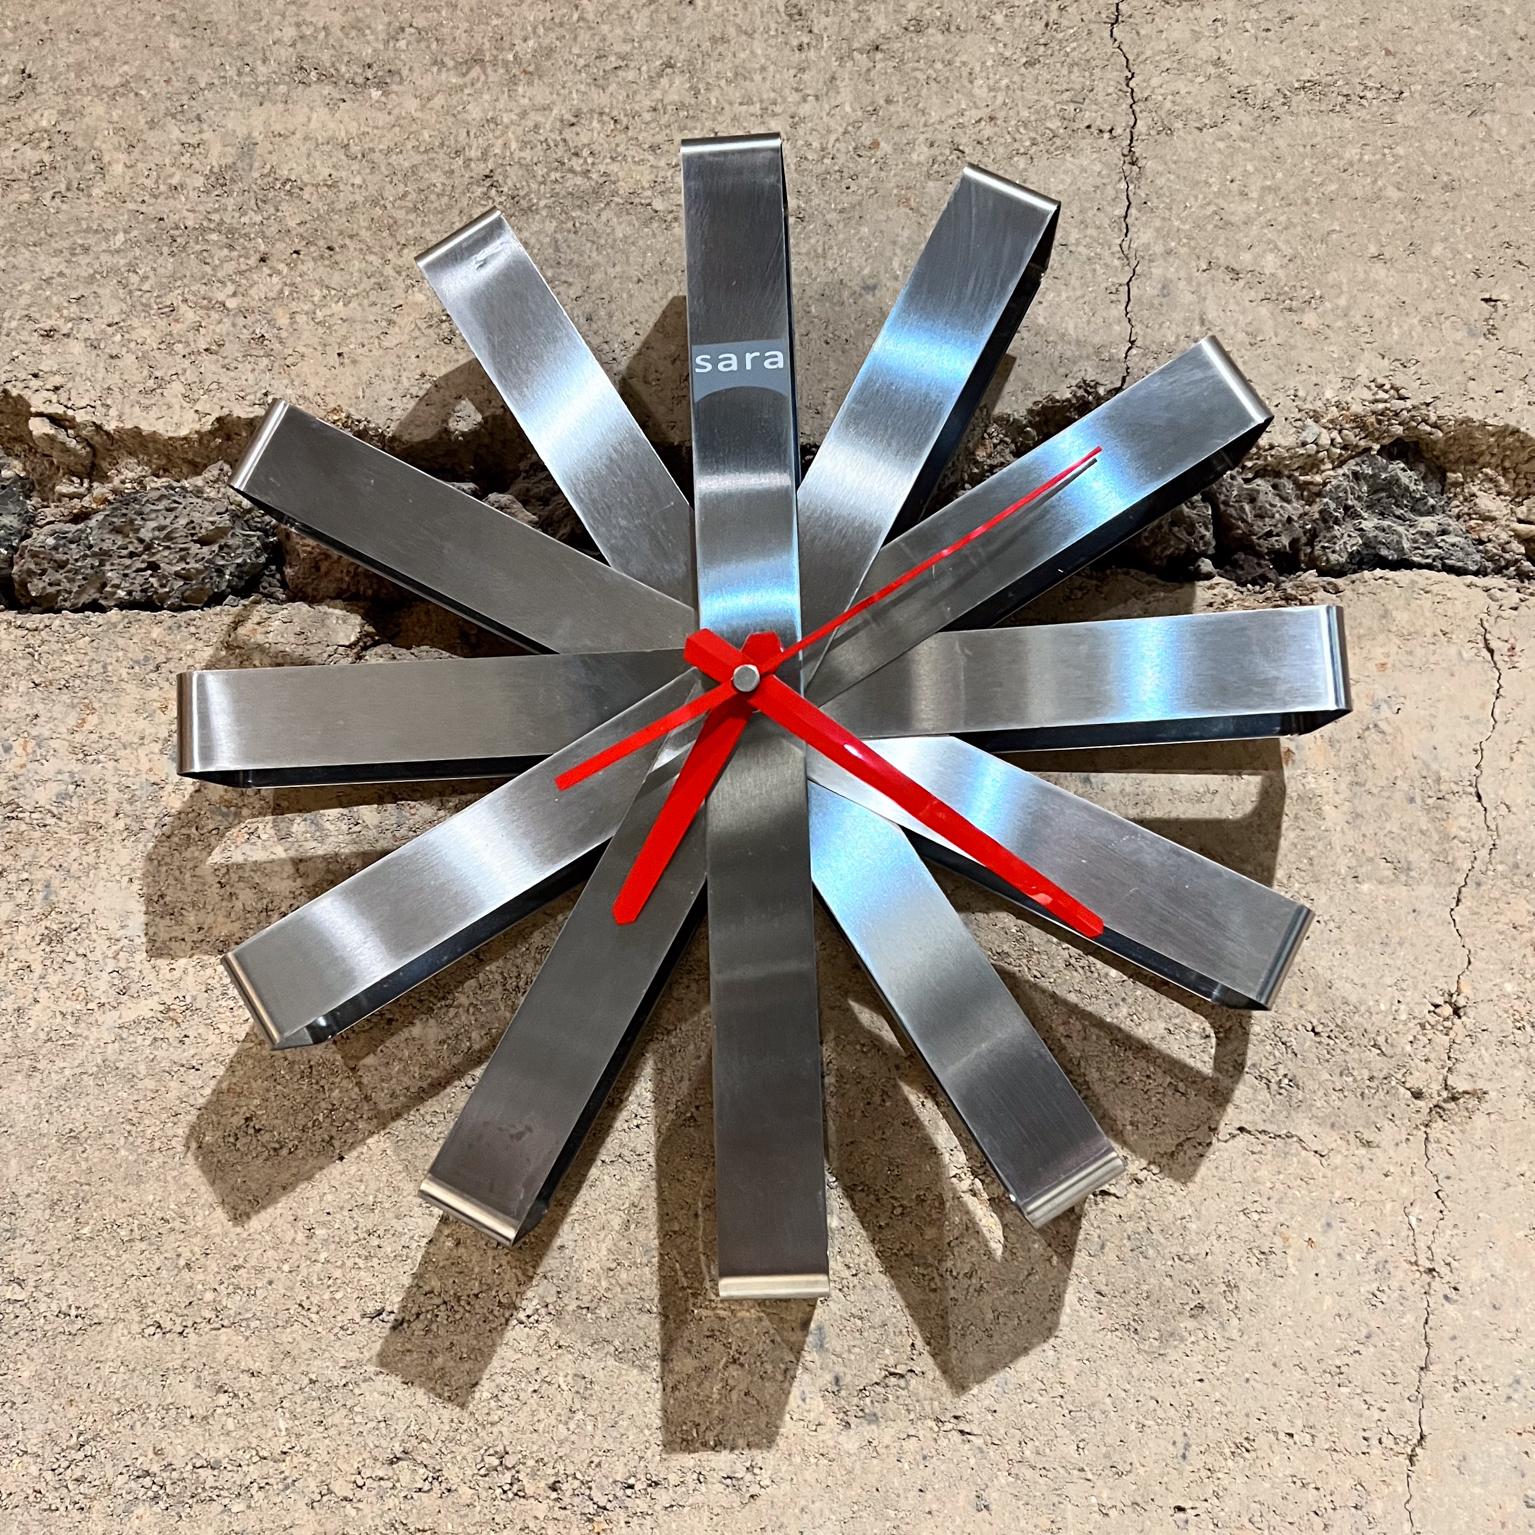 Sara Ribbon Metal Wall Clock 
stainless steel
2 d x 12 diameter
Preowned vintage condition
See all images for condition.